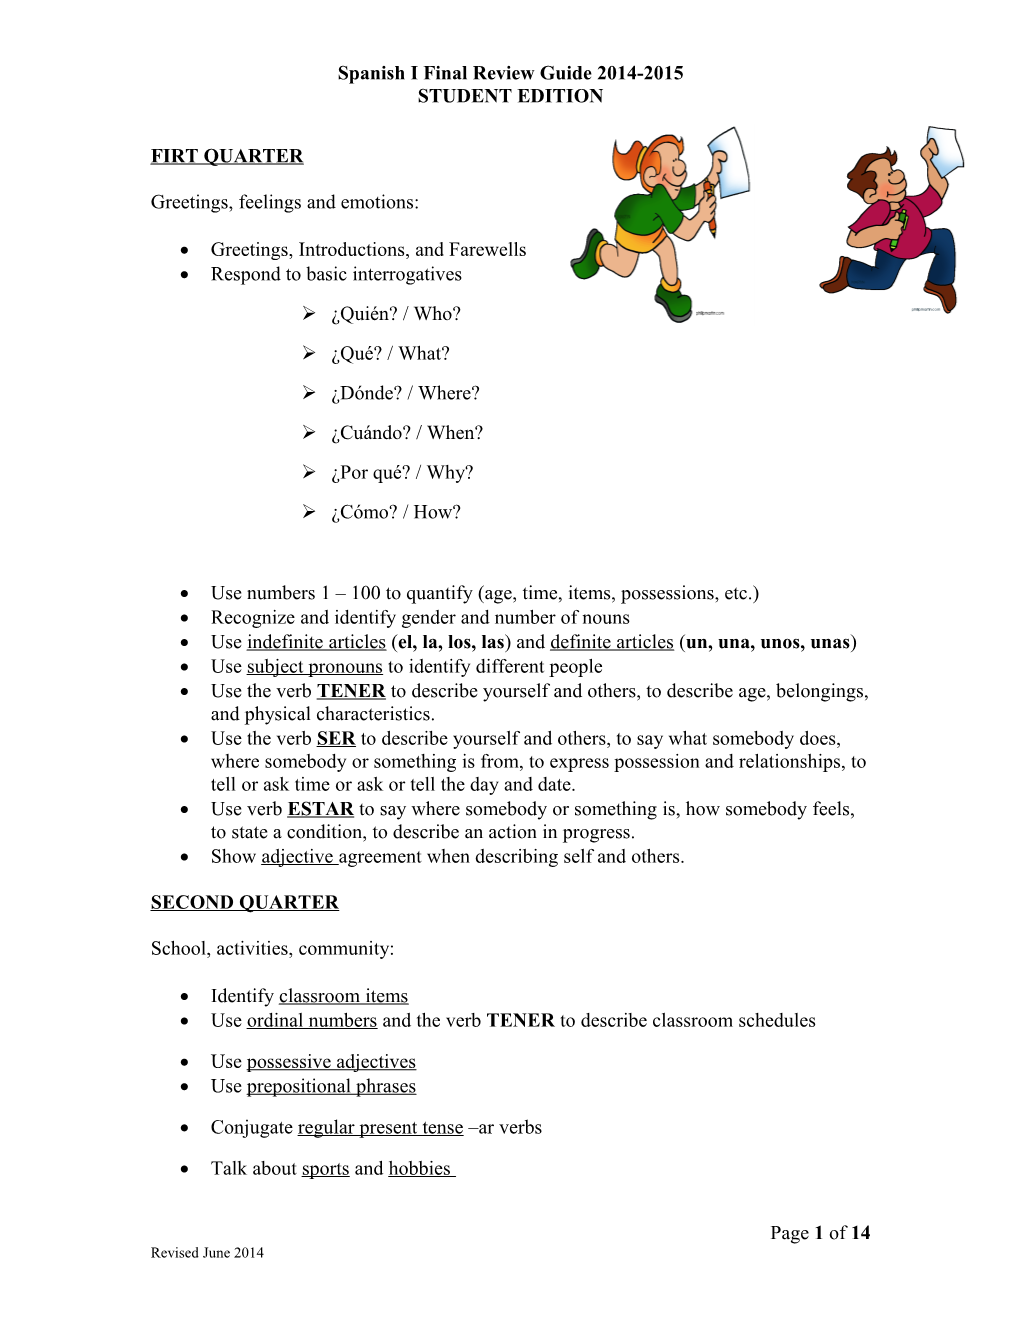 Spanish I Review Guide